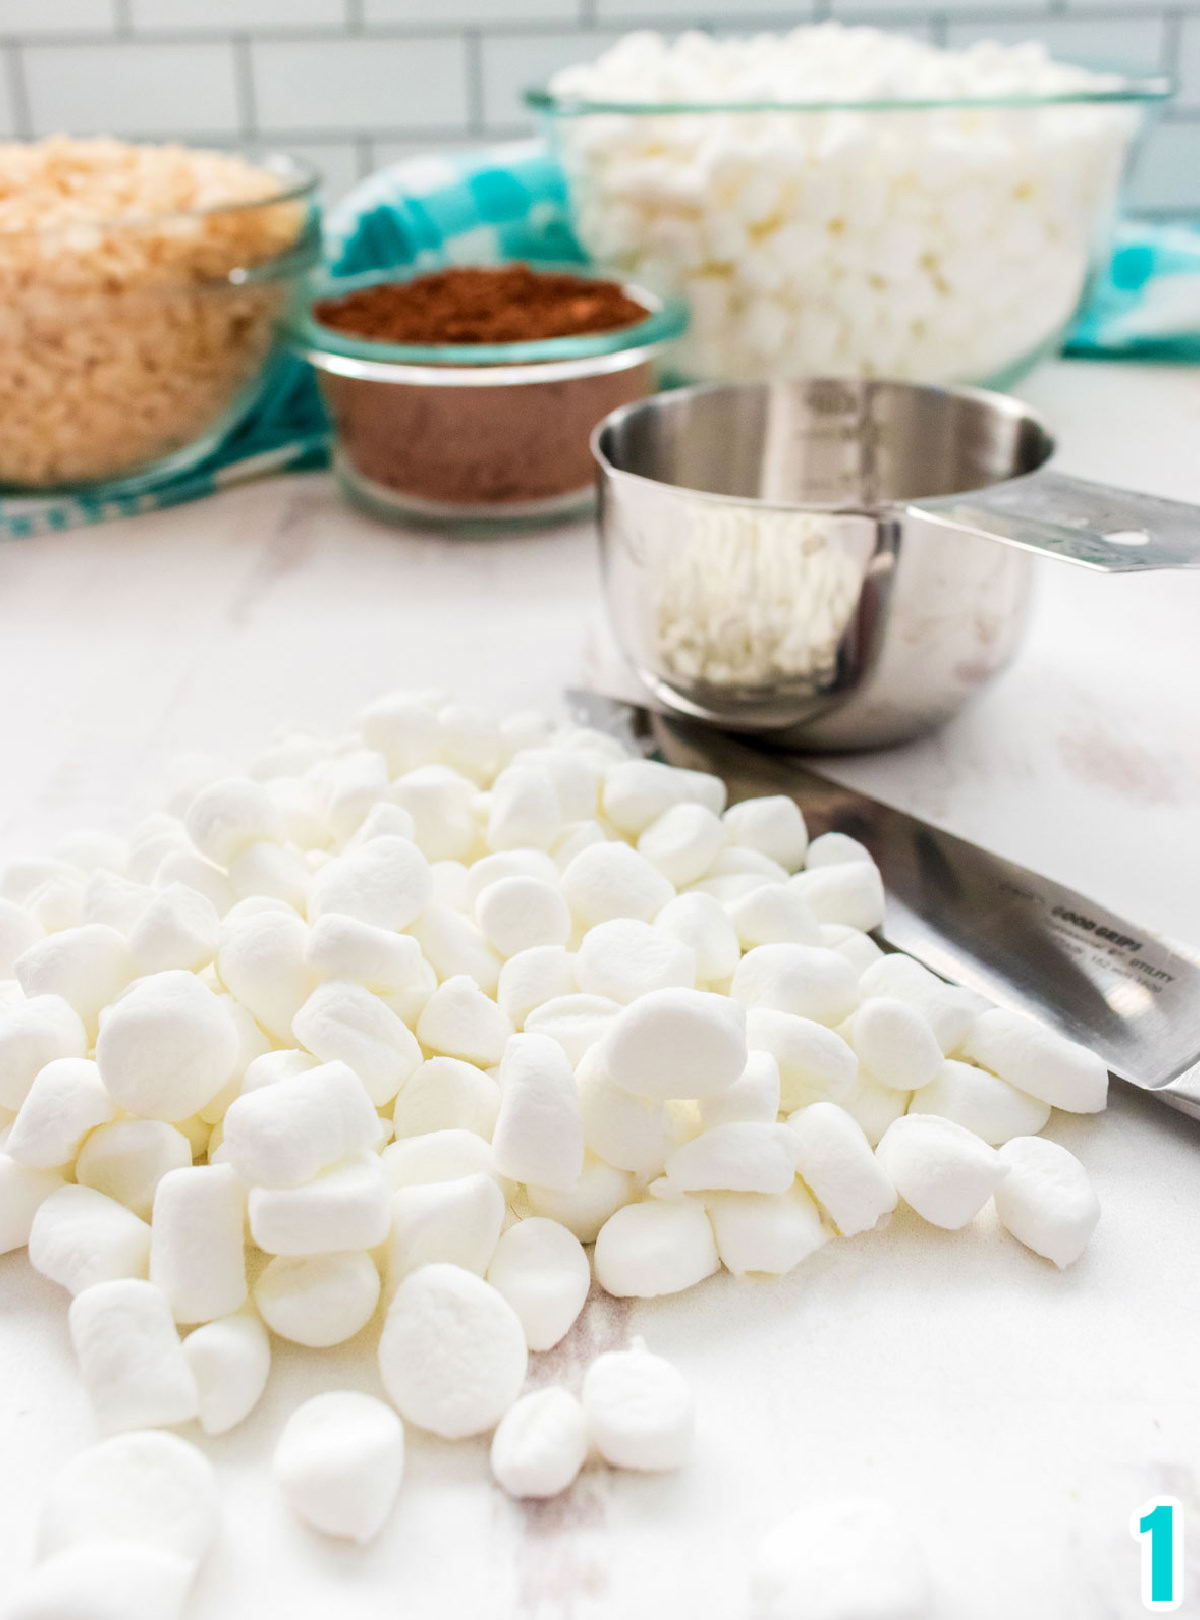 Chopped up Mini Marshmallows laying on a white table sitting next to a measuring cup, and bowls of cocoa powder, marshmallows and Rice Krispie Cereal.